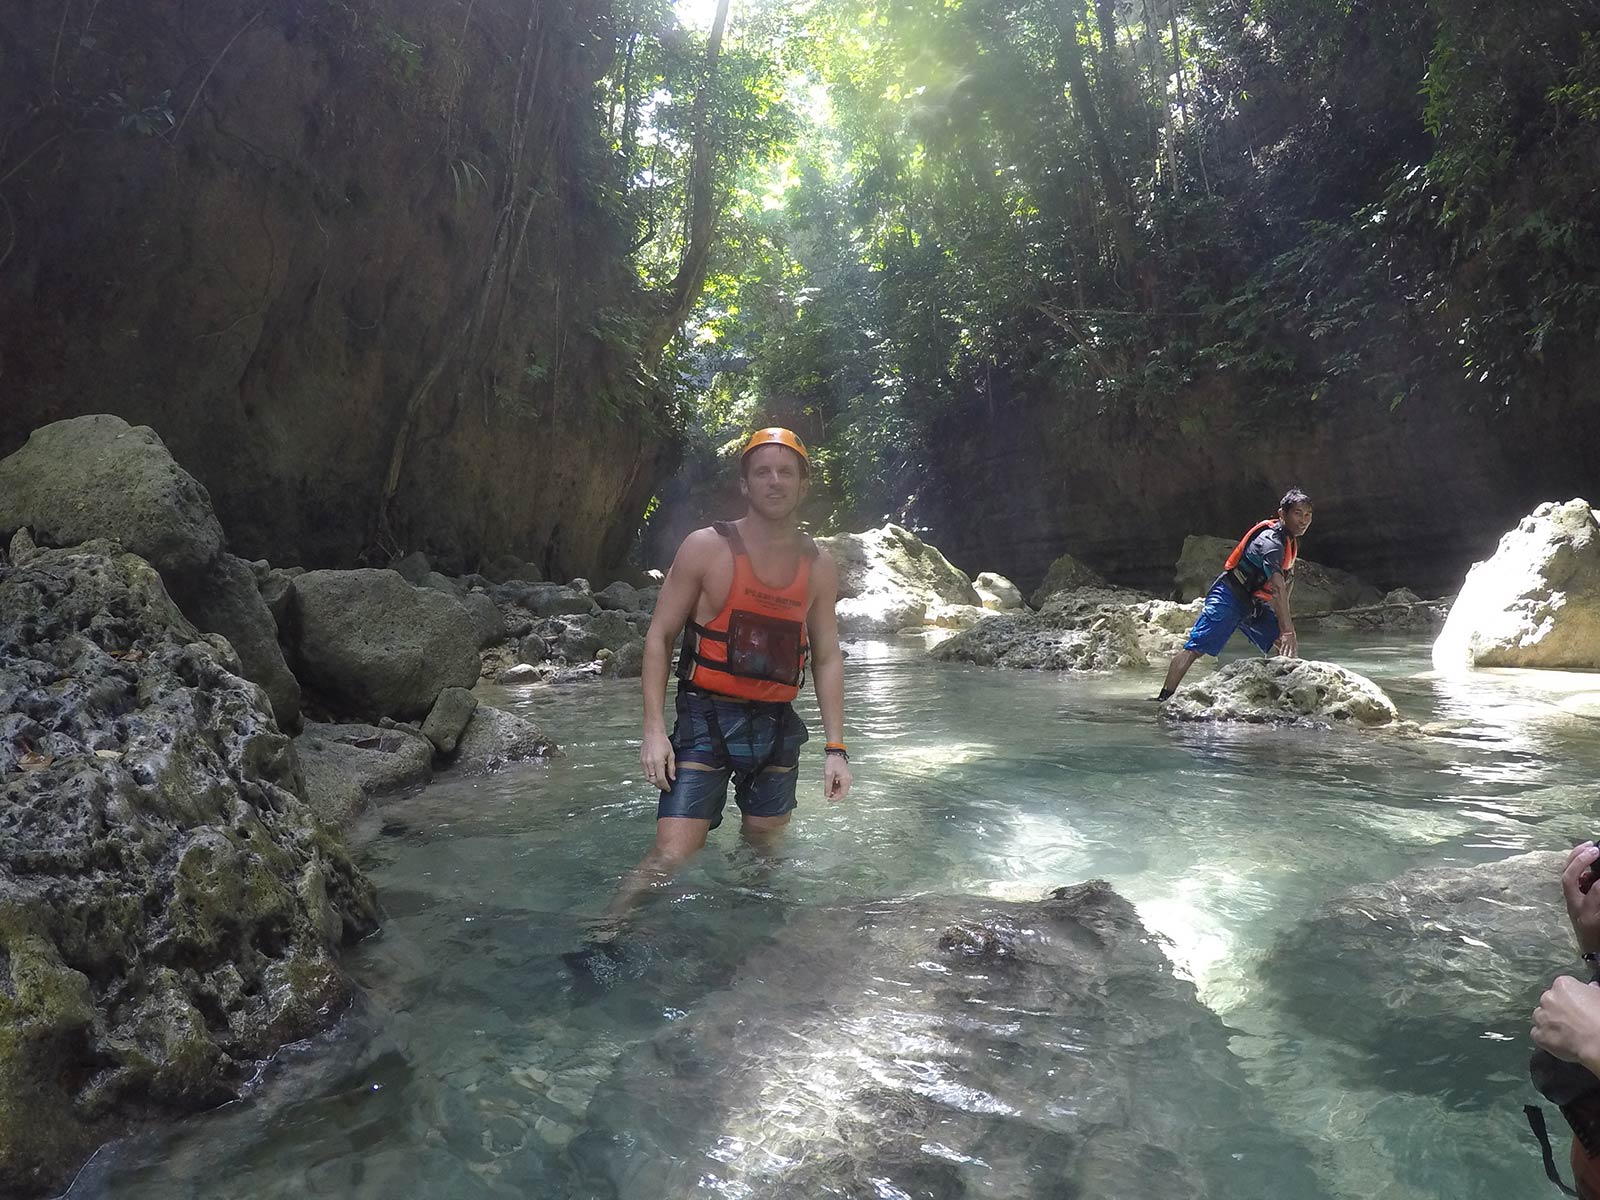 David Simpson at the rocky river surrounded by trees in Moalboal, Philippines. Canyoneering in Moalboal